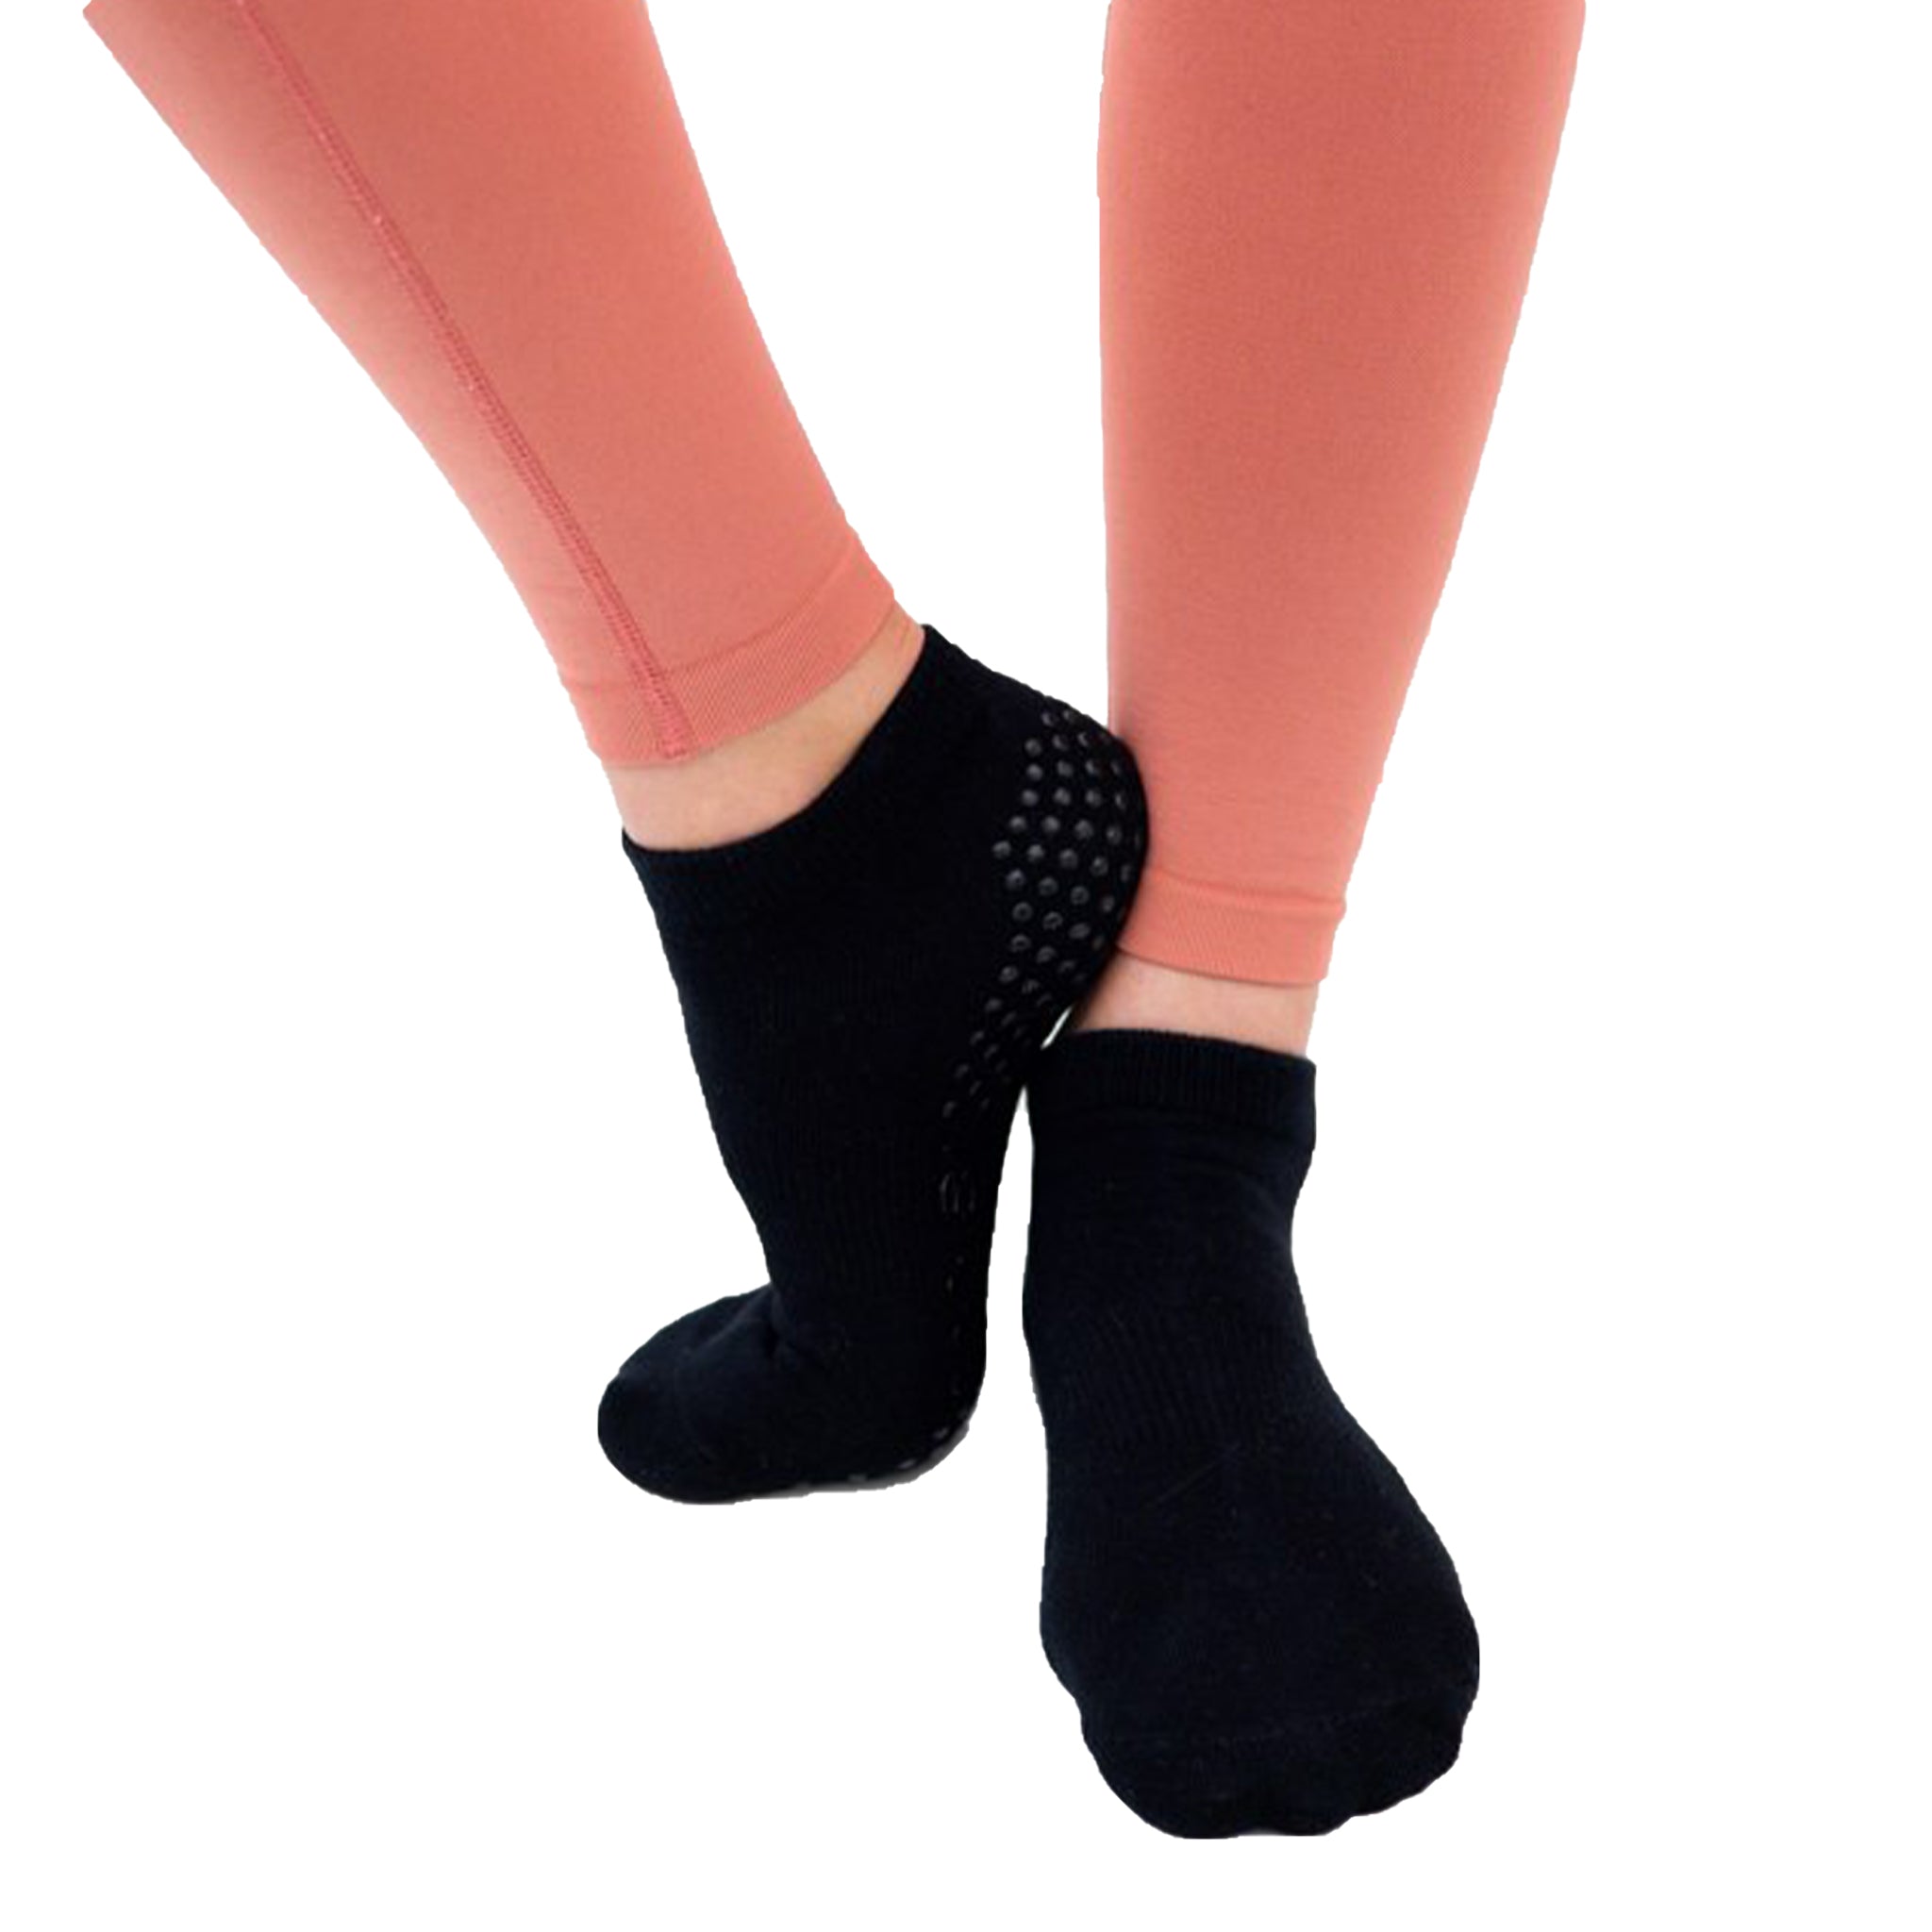 yeuG Grip Socks for Women Pilates Socks with Grips Open Top Non